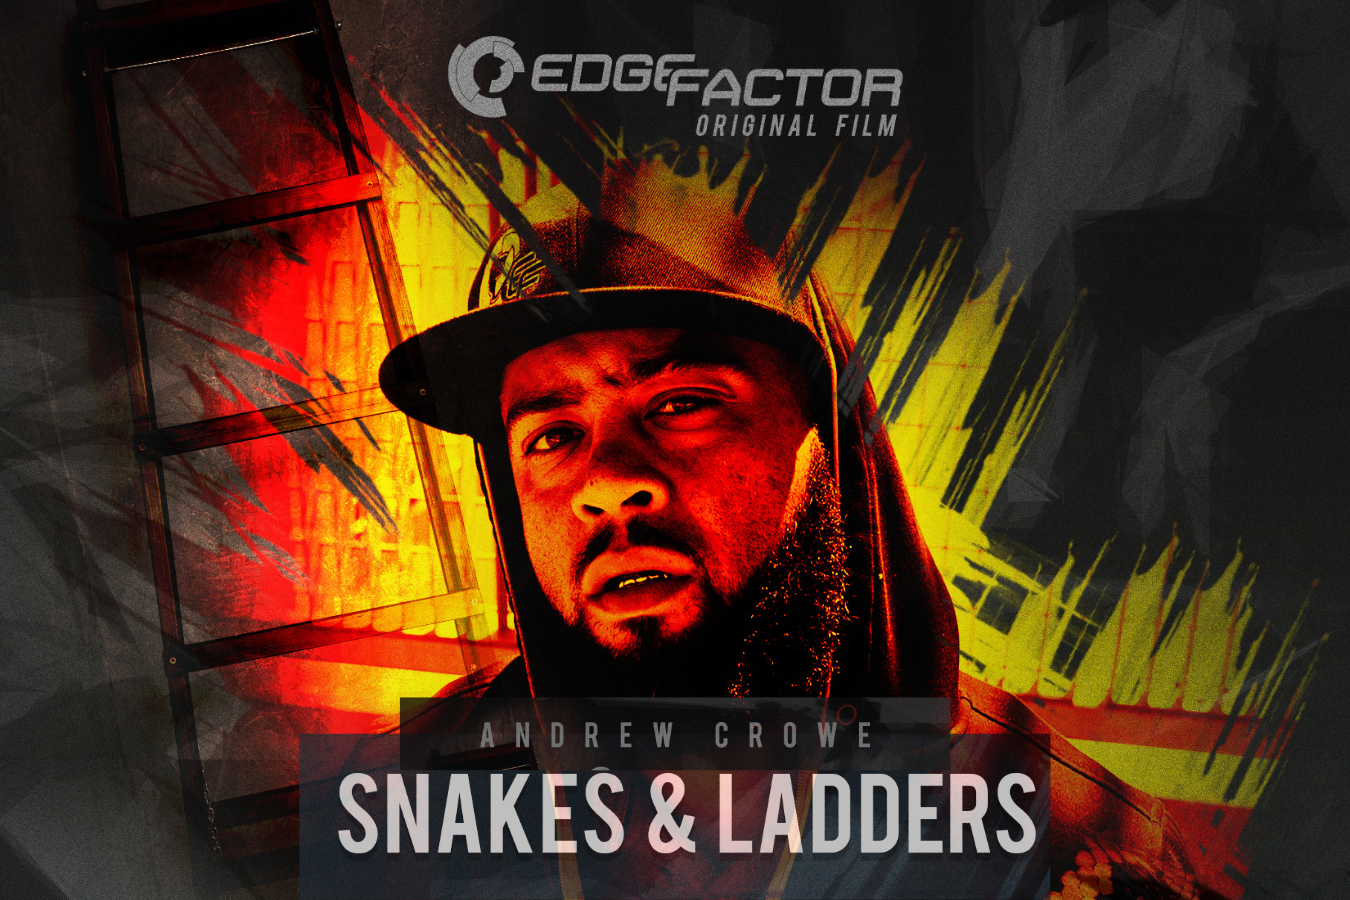 Edge Factor first episode of an all new series: Journey, features Drew Crowe in Snakes & Ladders 